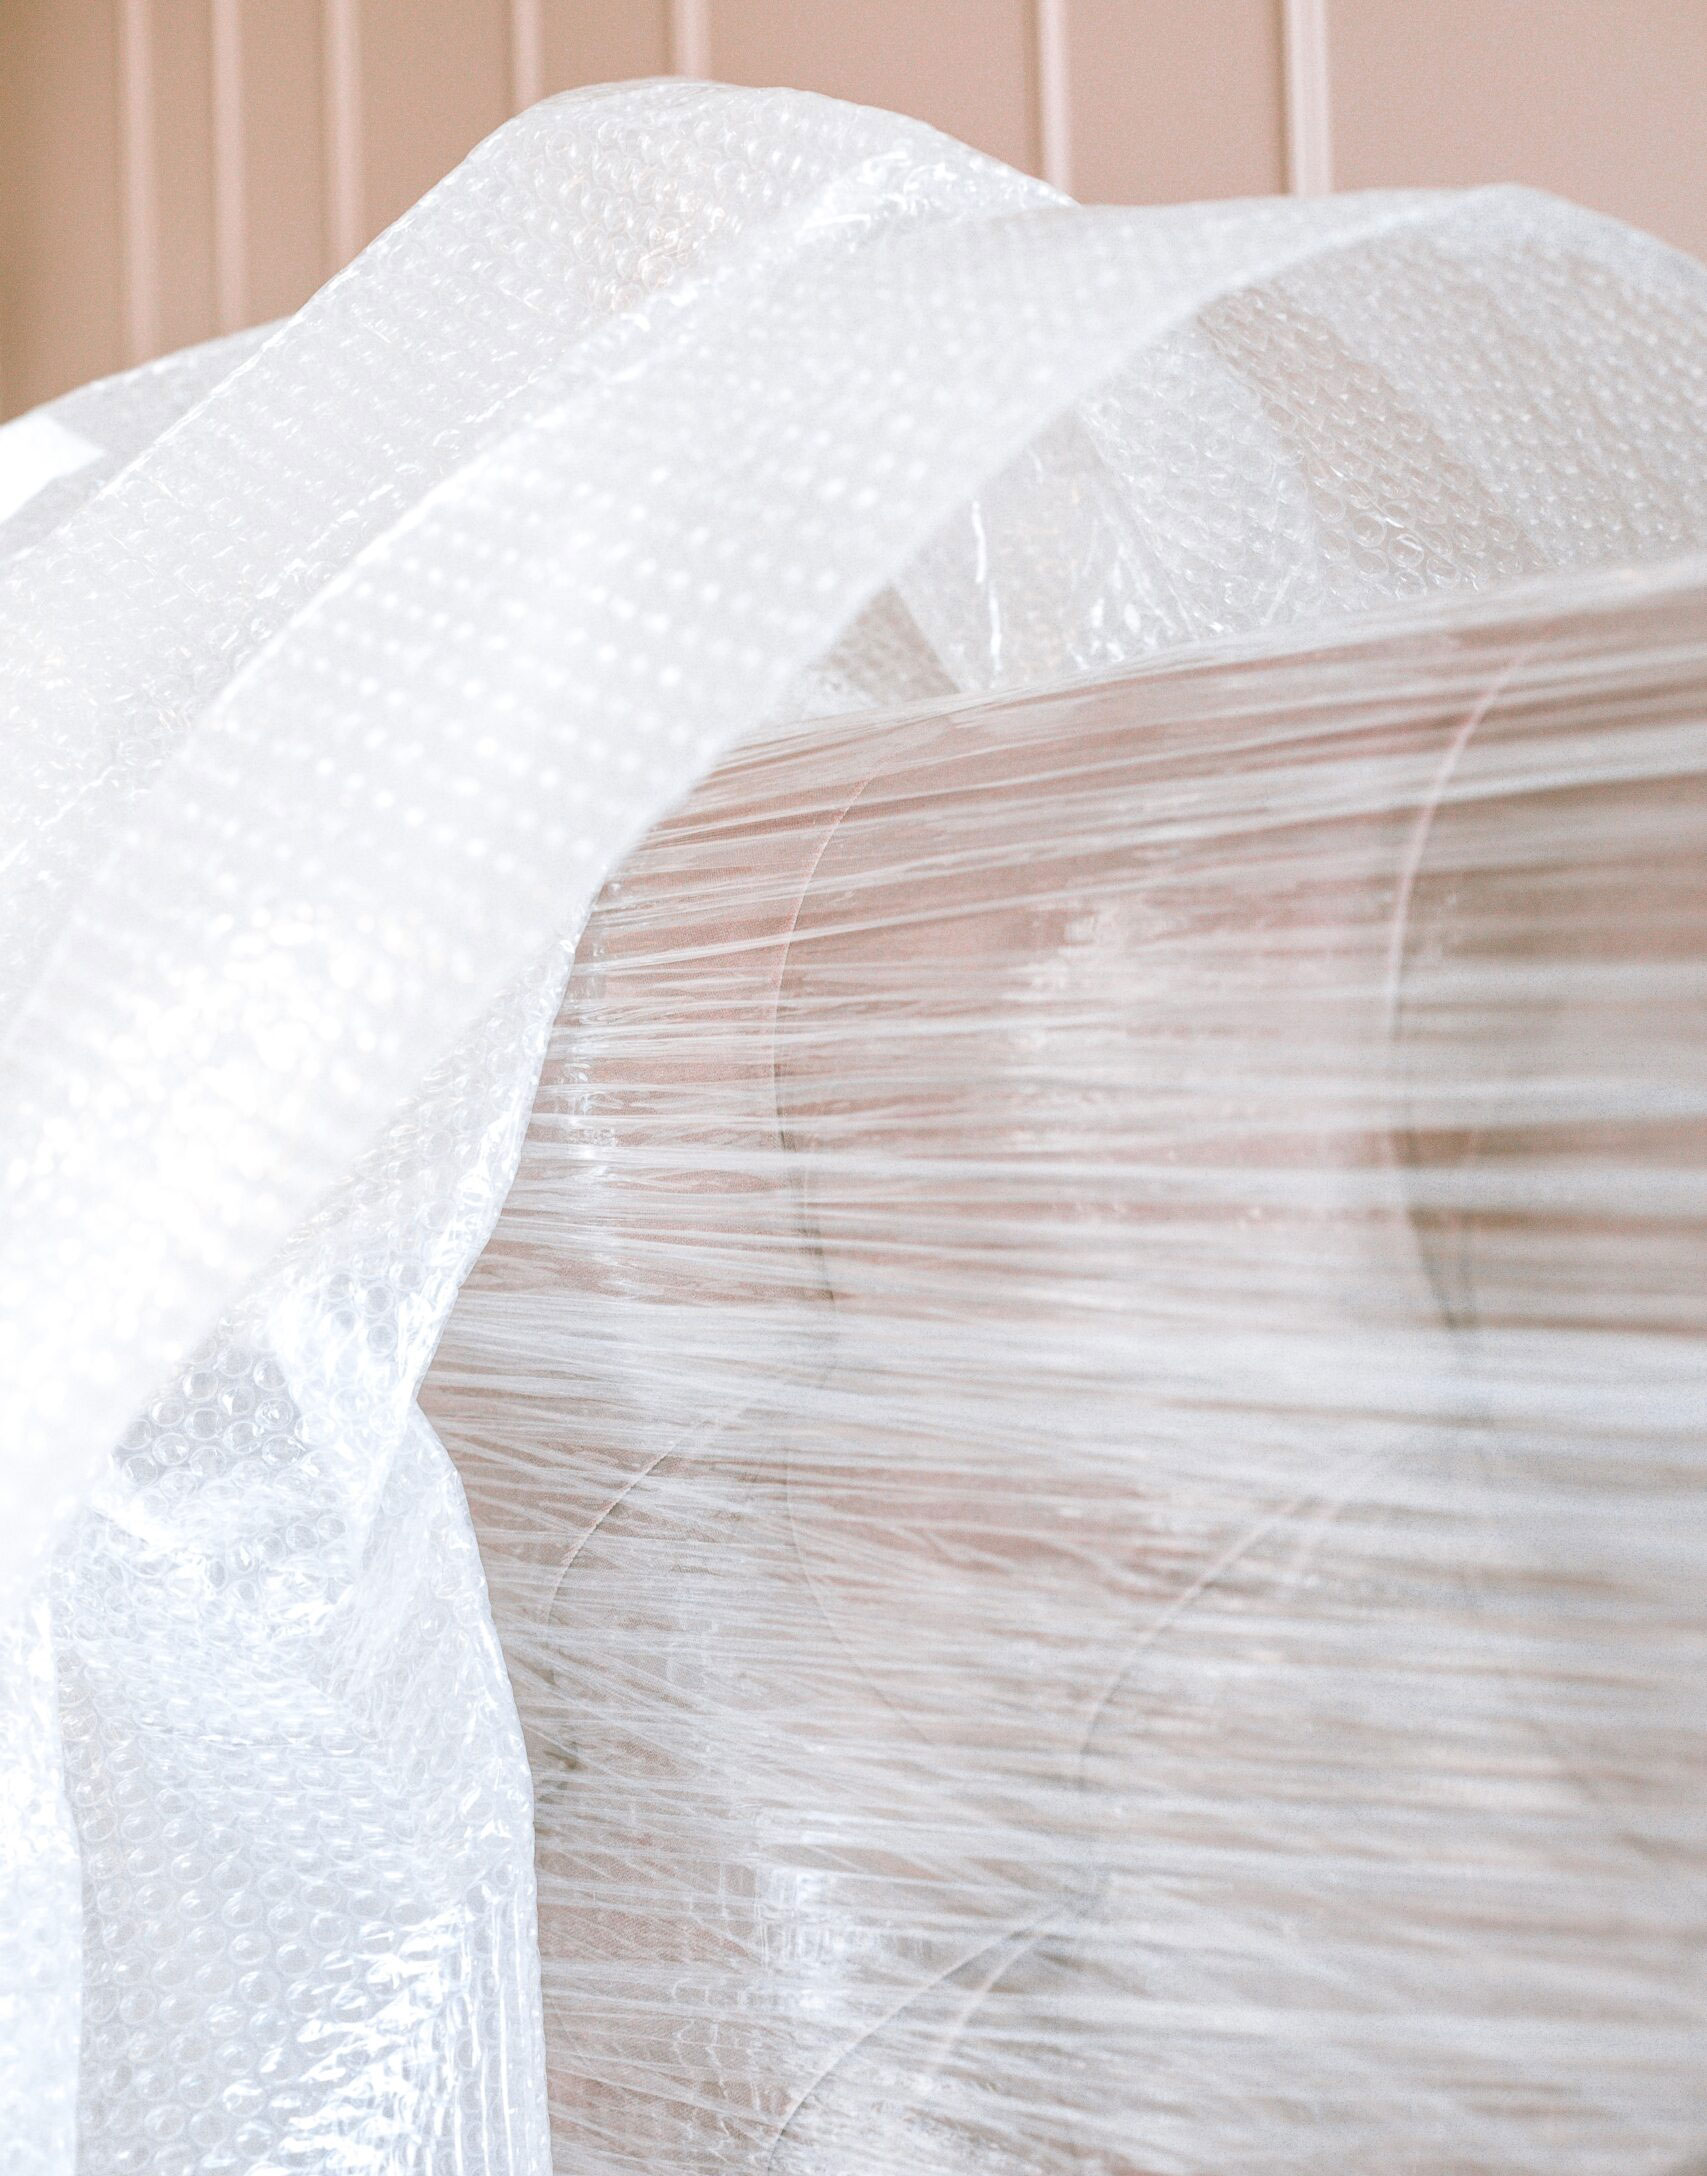 Sydney to Geelong Interstate Removalists: Expertly Wrapped Item for Safe Transport